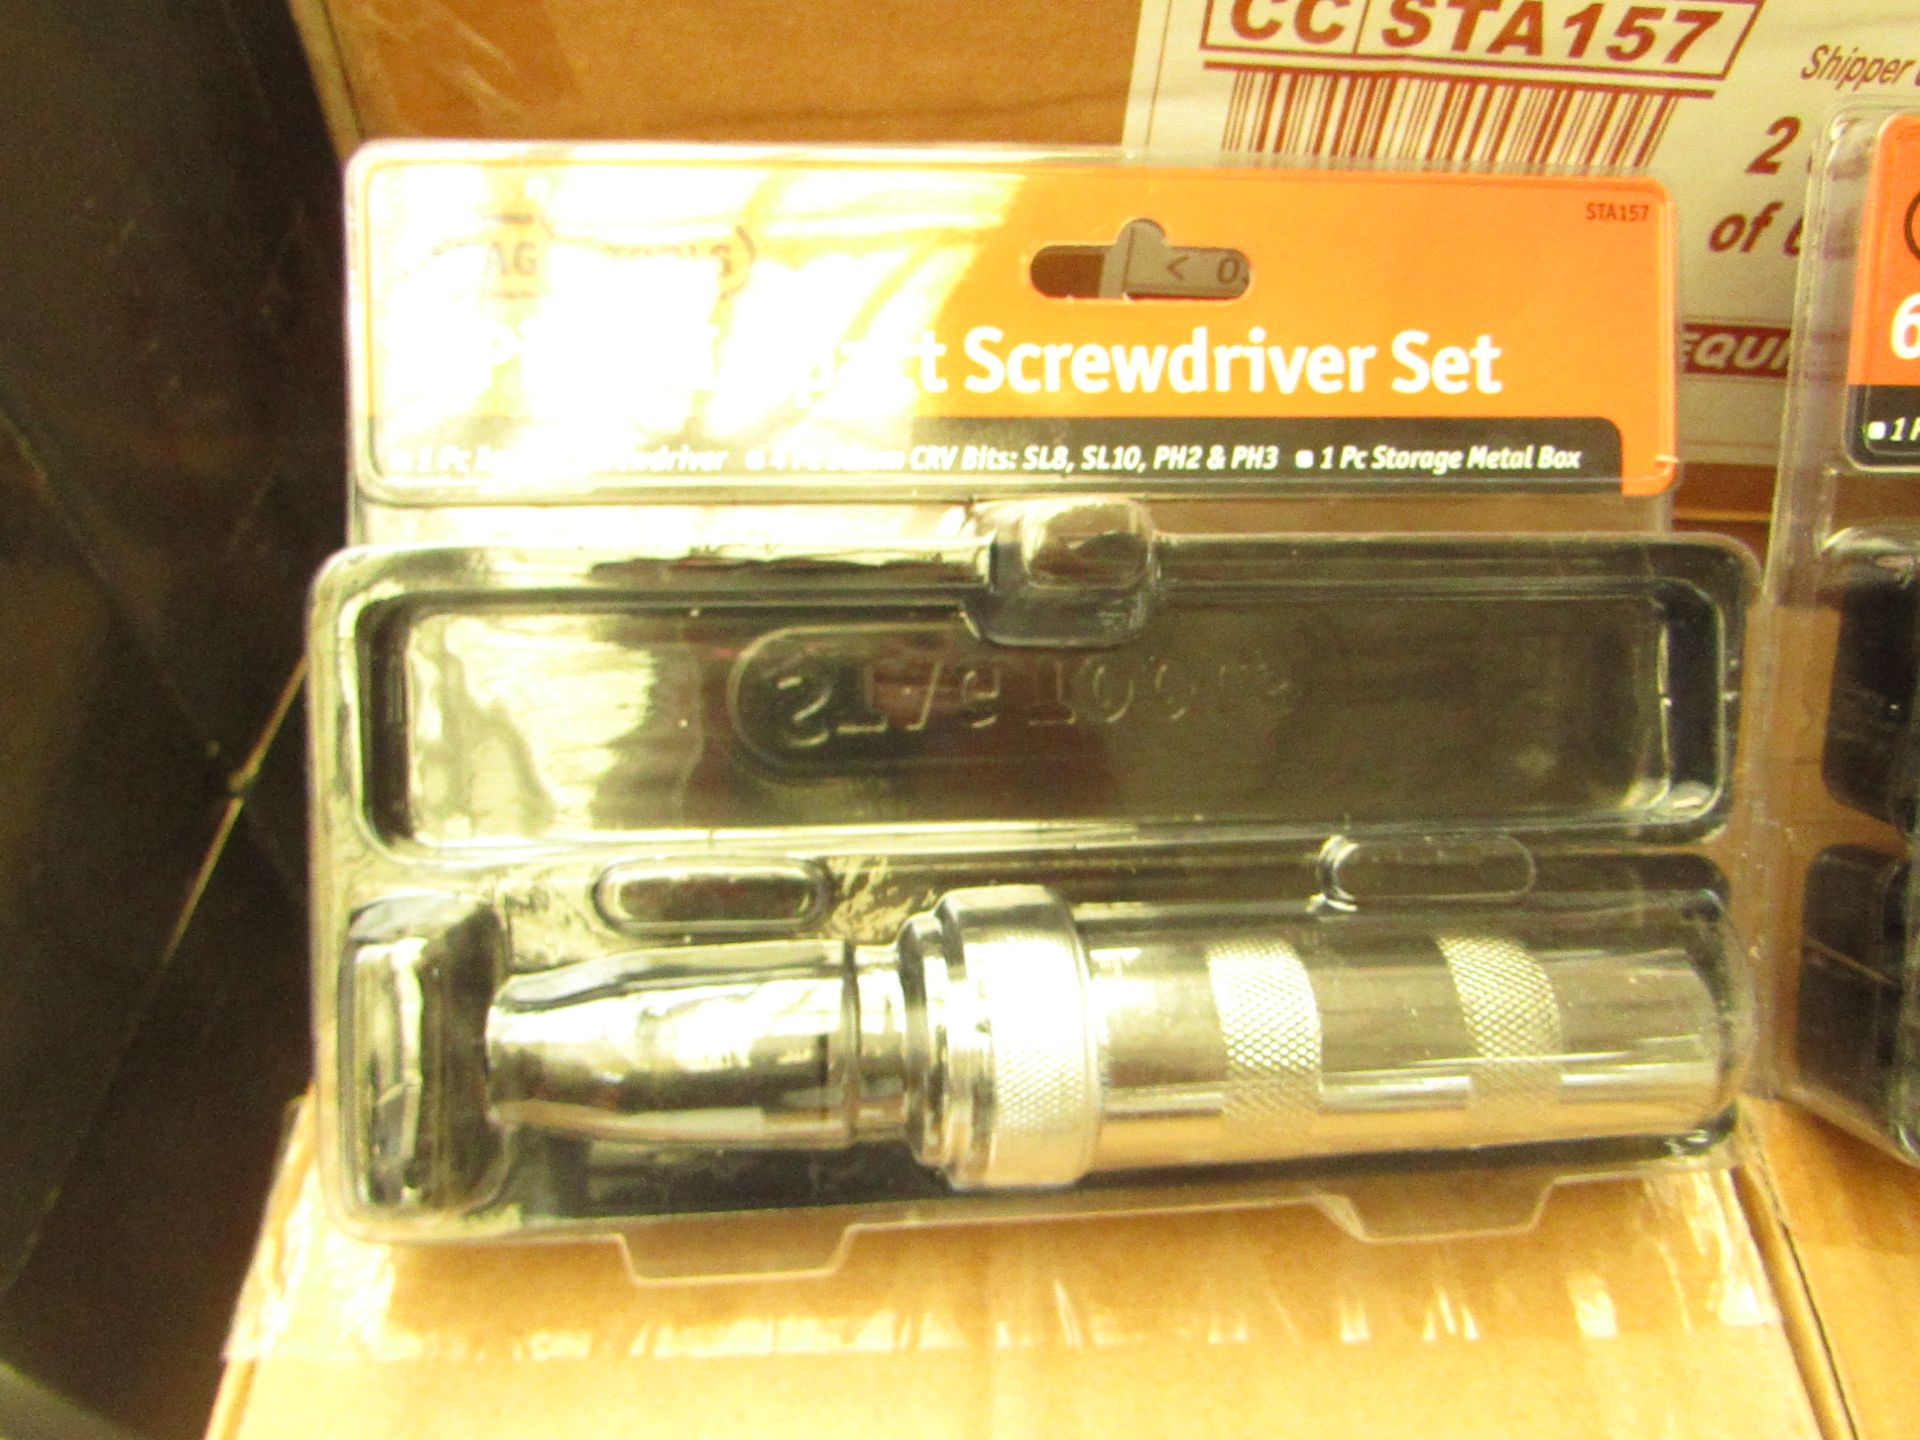 Stag Tools impact screwdriver set, new and packaged.